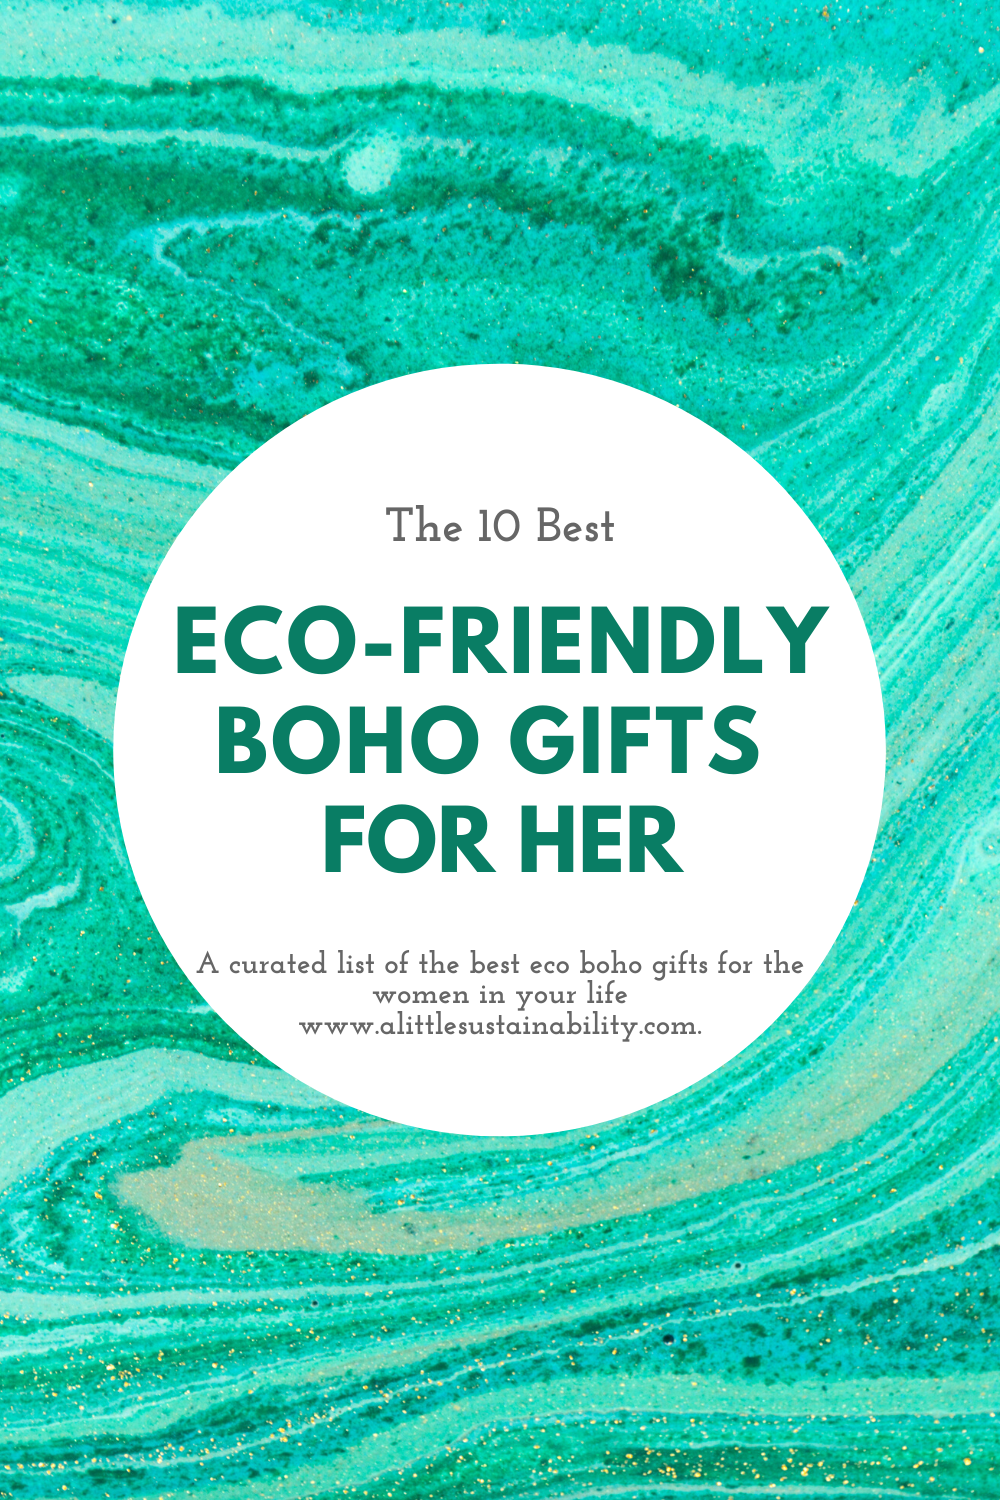 The 10 best boho & eco-friendly gifts for her. A curated list of eco-friendly boho gifts for her. Boho living gifts, low waste living gifts for her.